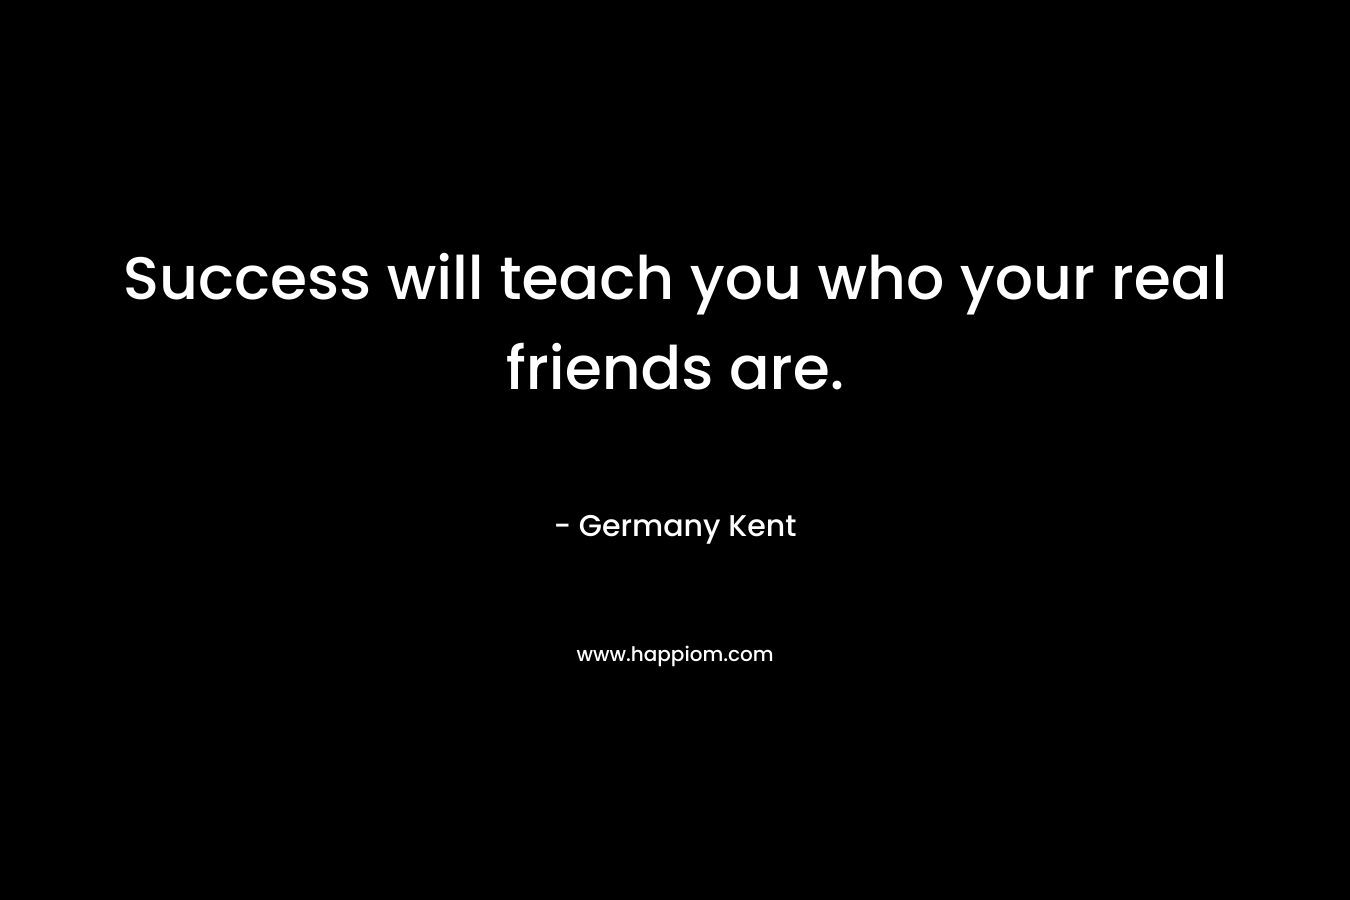 Success will teach you who your real friends are.